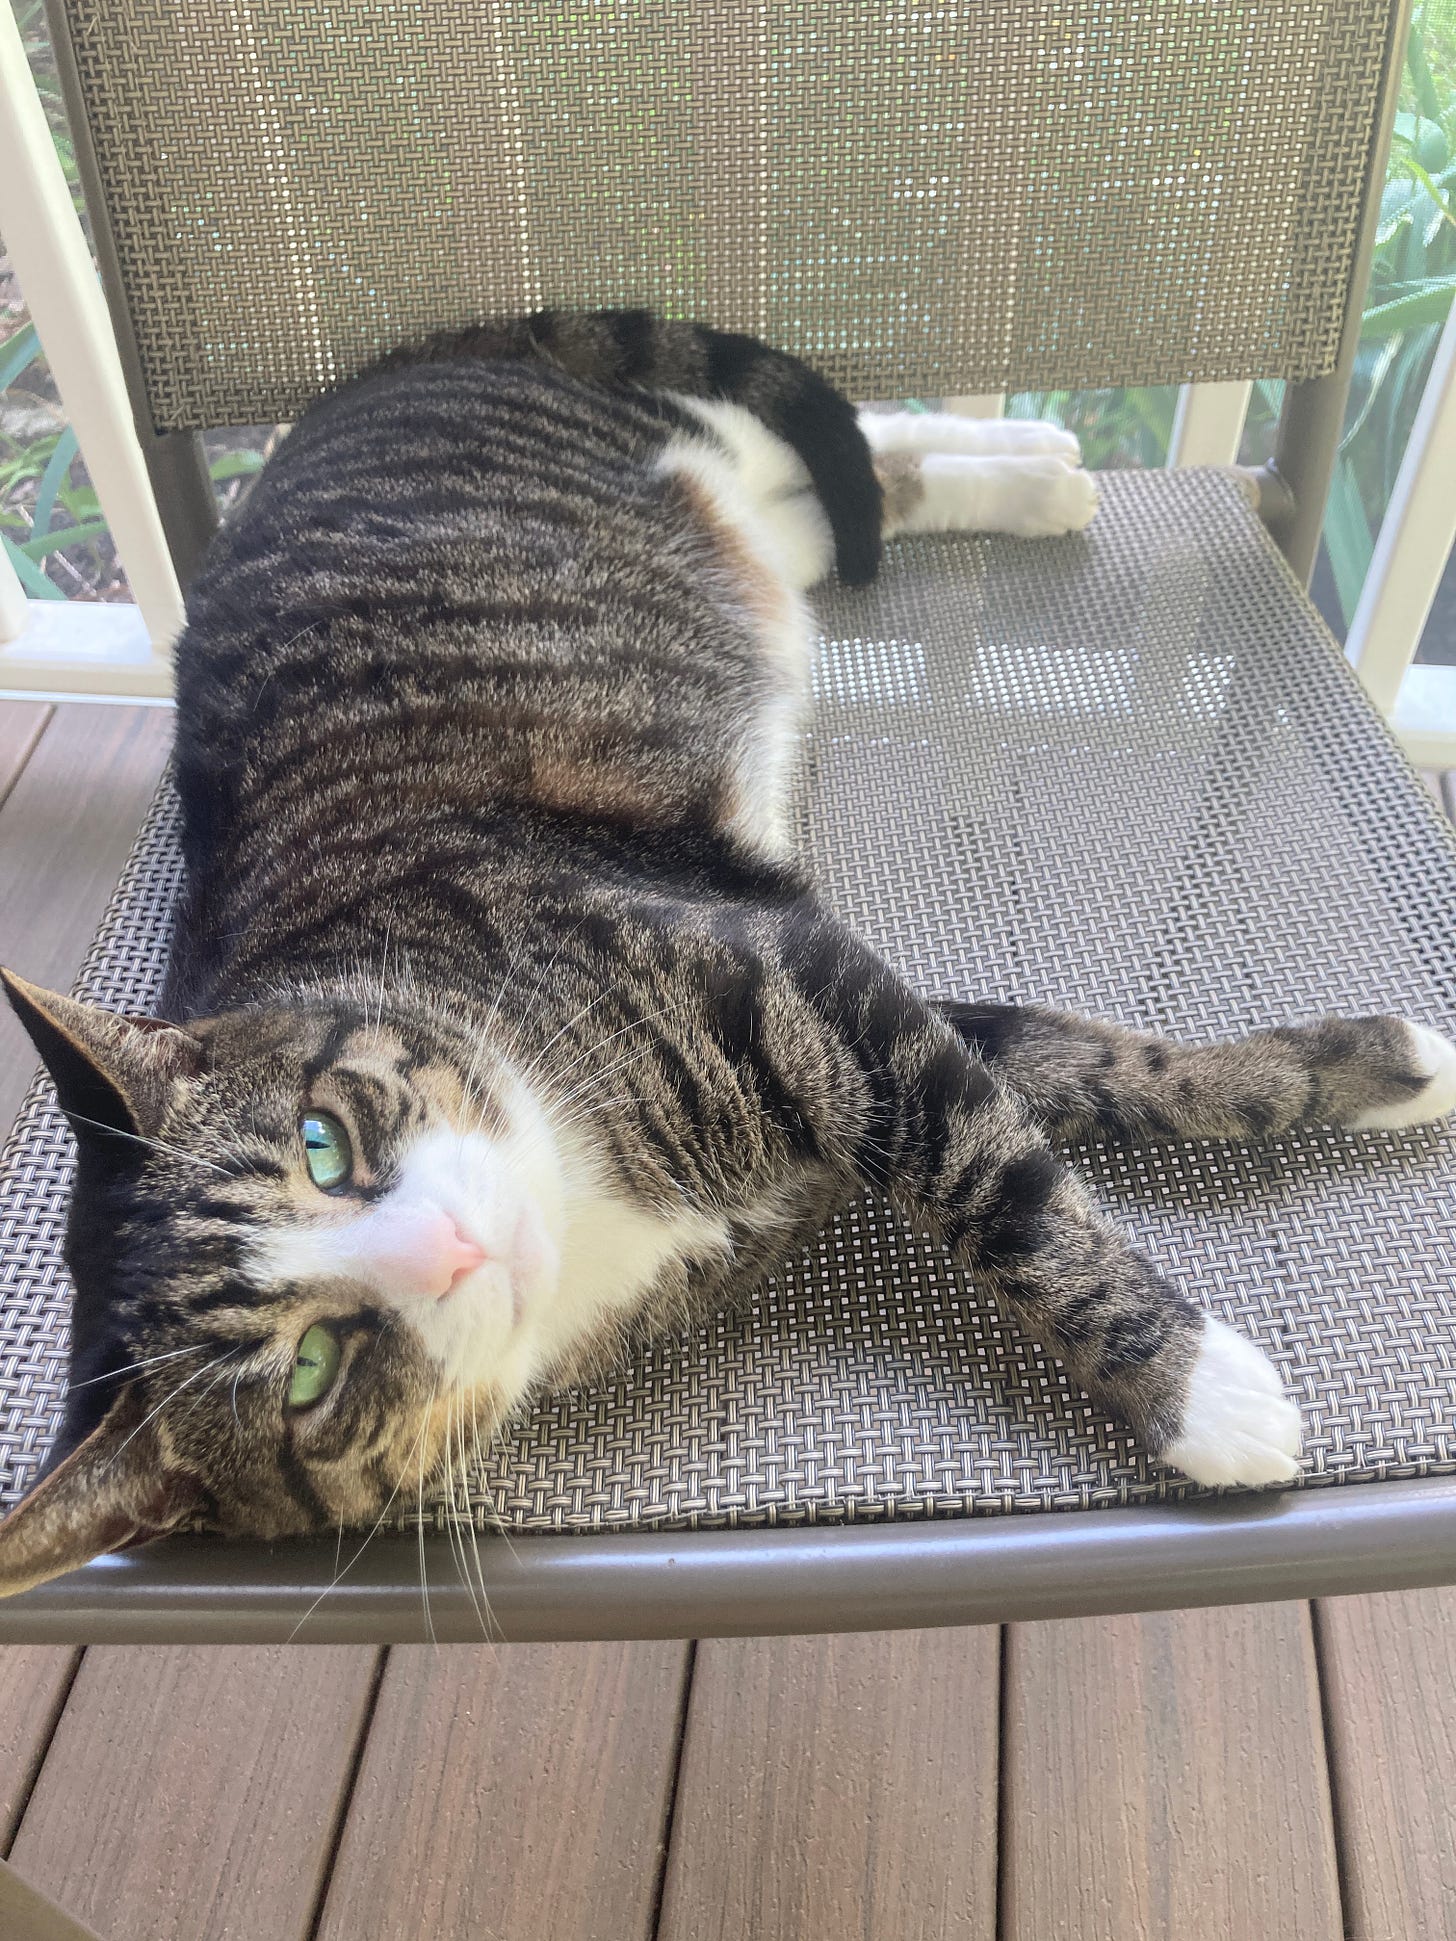 A tabby cat with white points, lying on a chair on a screened in porch